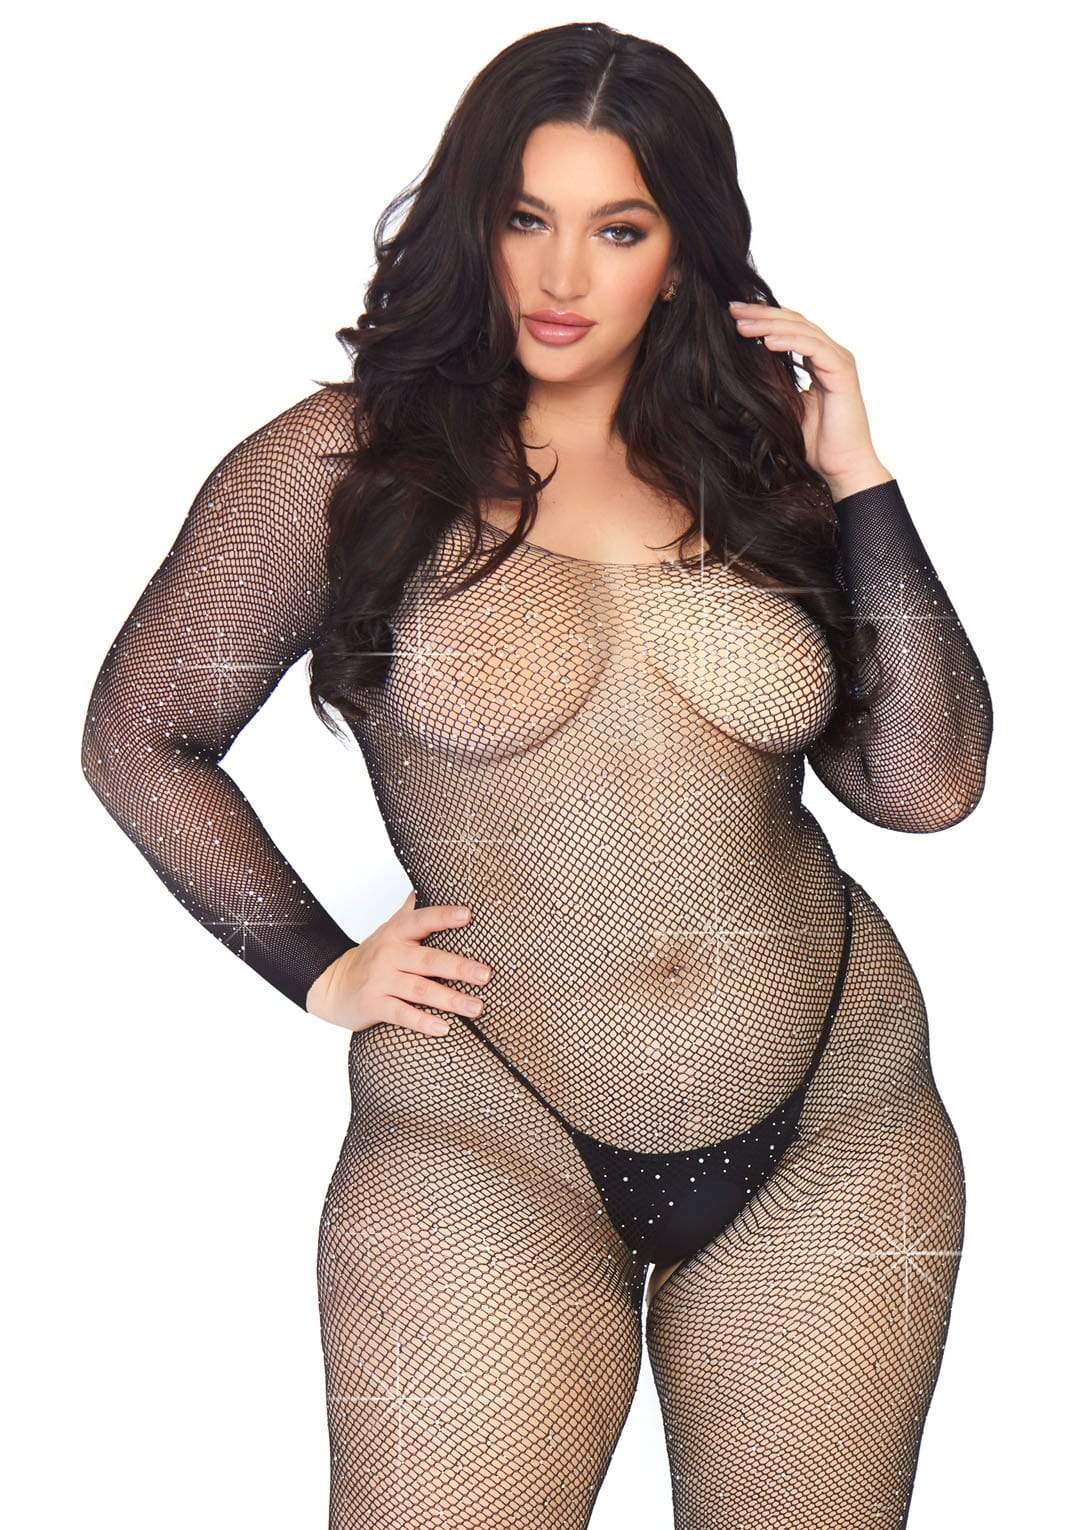 A closer view of the plus size model wearing the Crystalized Seamless Fishnet Bodystocking.